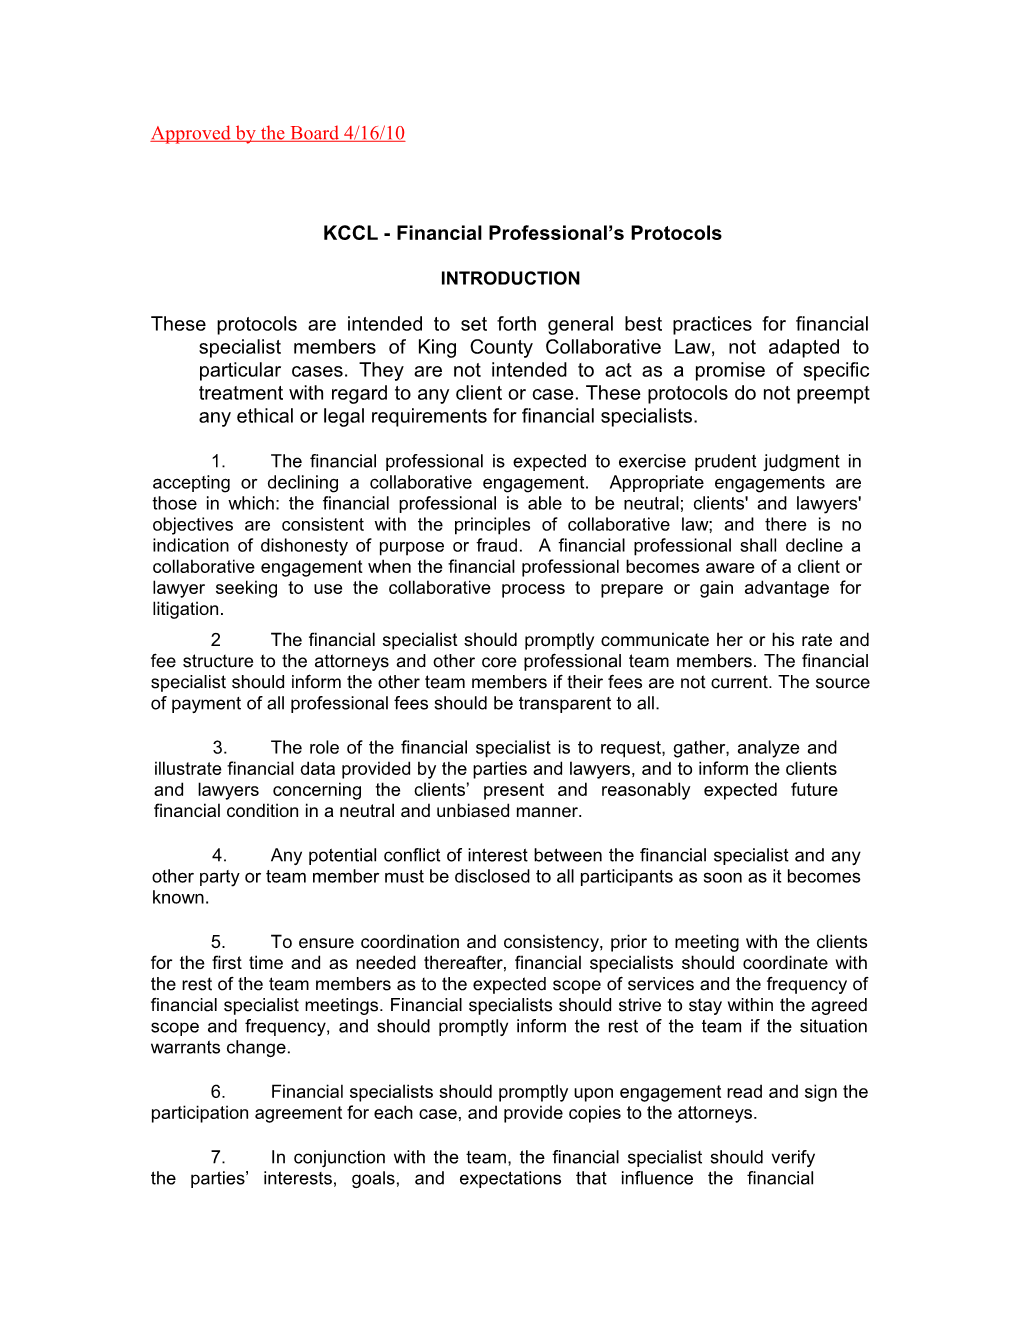 Protocols of Practice For